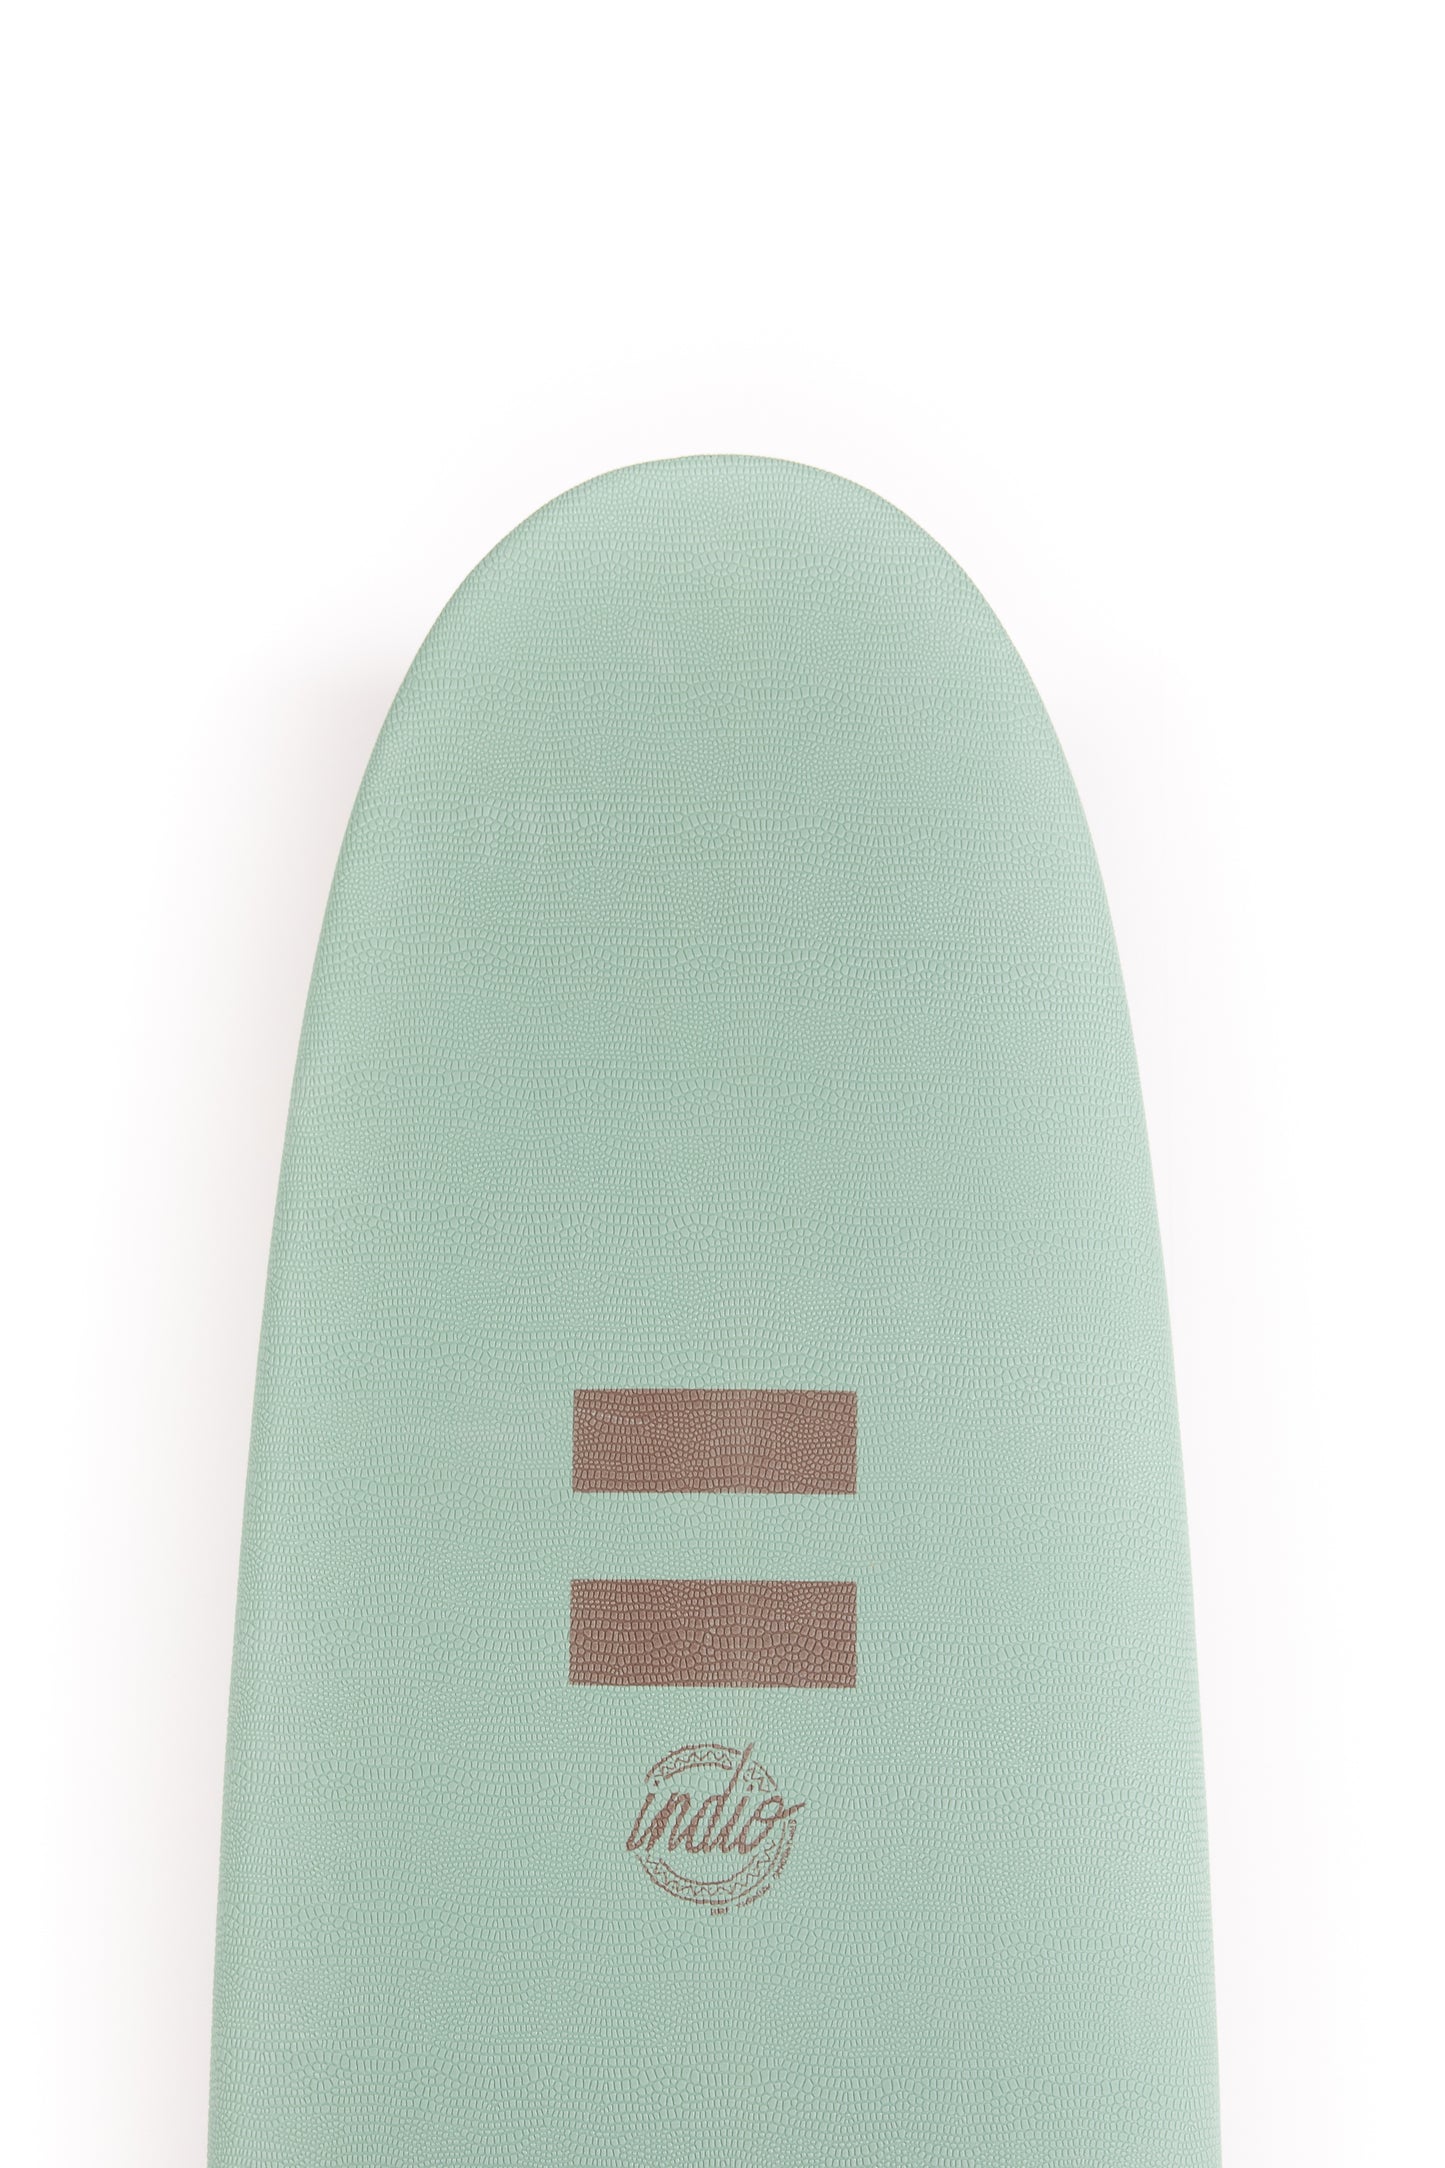 
                  
                    Pukas Surf Shop Indio Surfboards Mid Length Ultra Mint 7'0"
                  
                